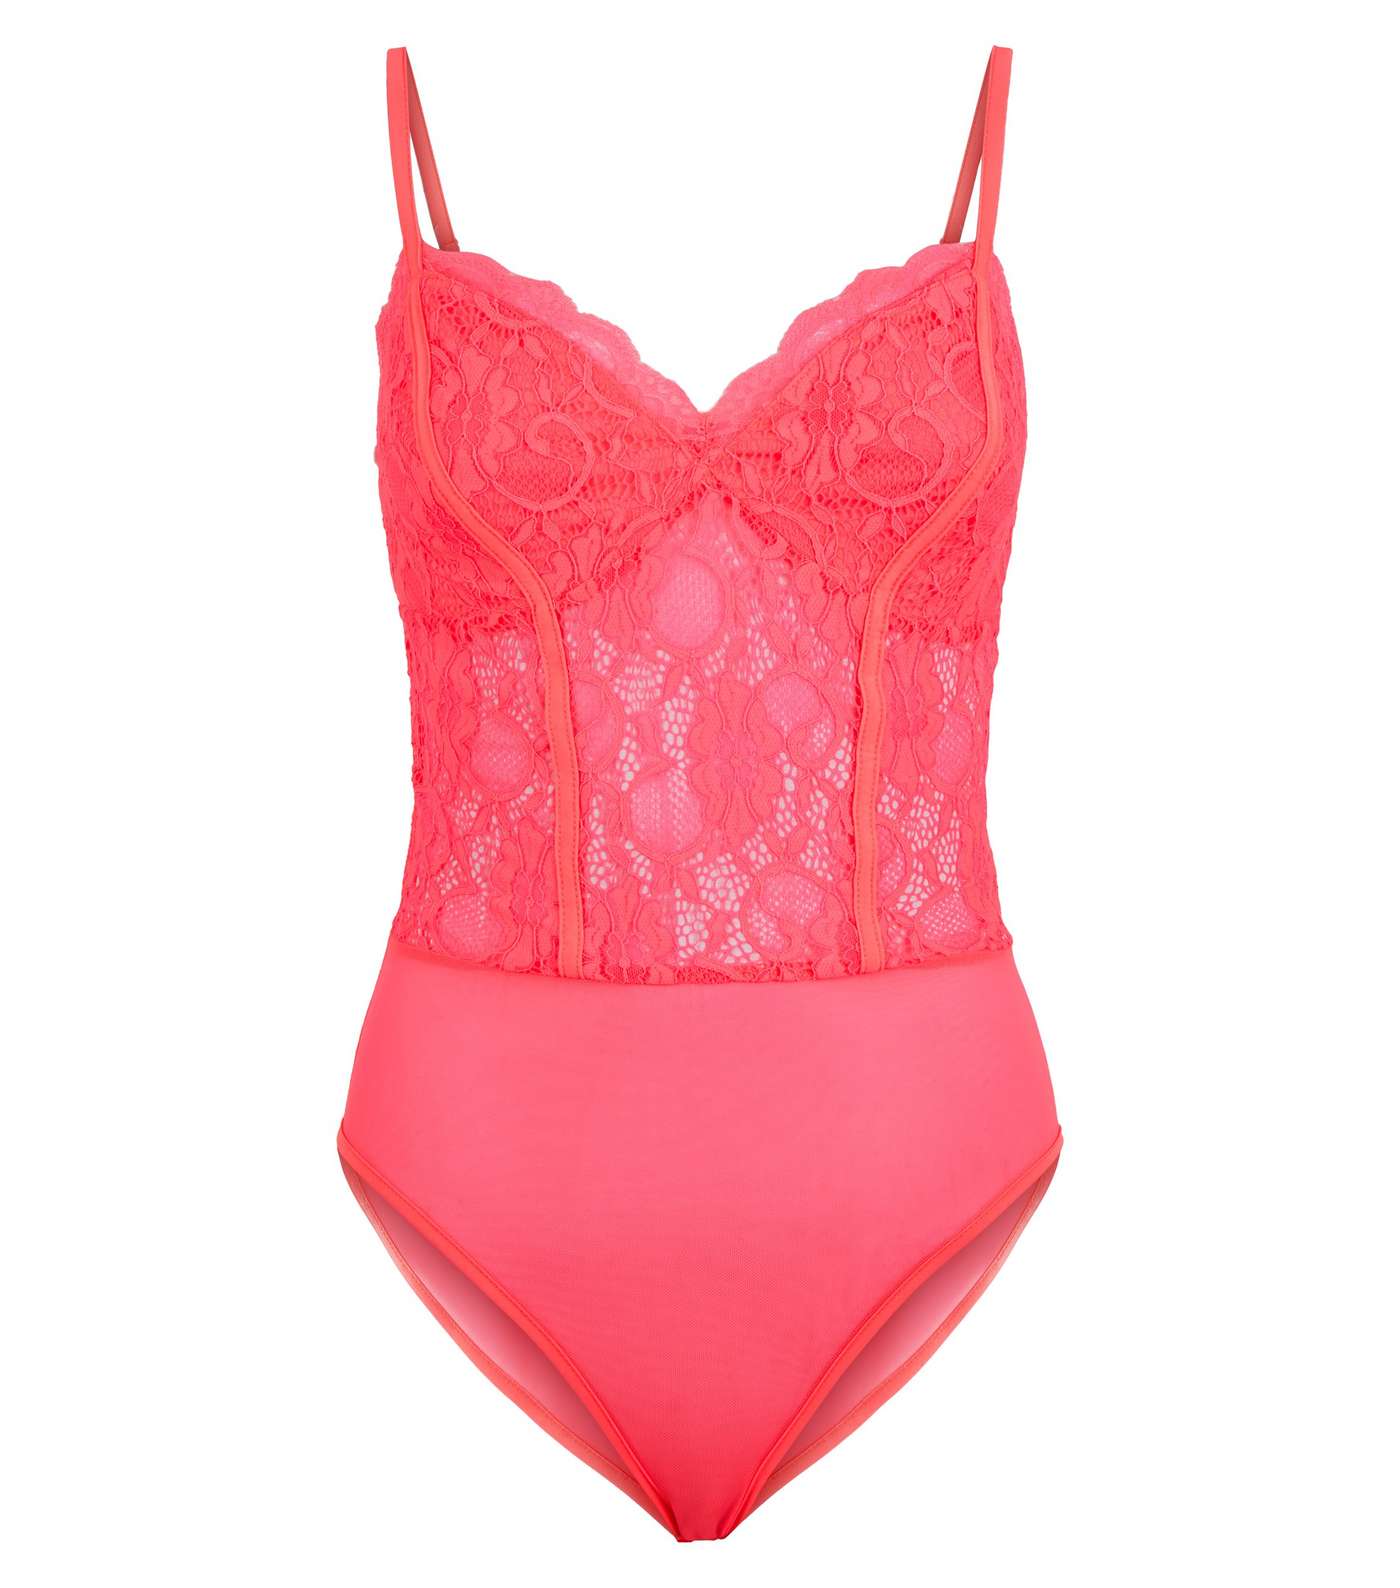 Bright Pink Neon Sheer Lace Bodysuit Image 4